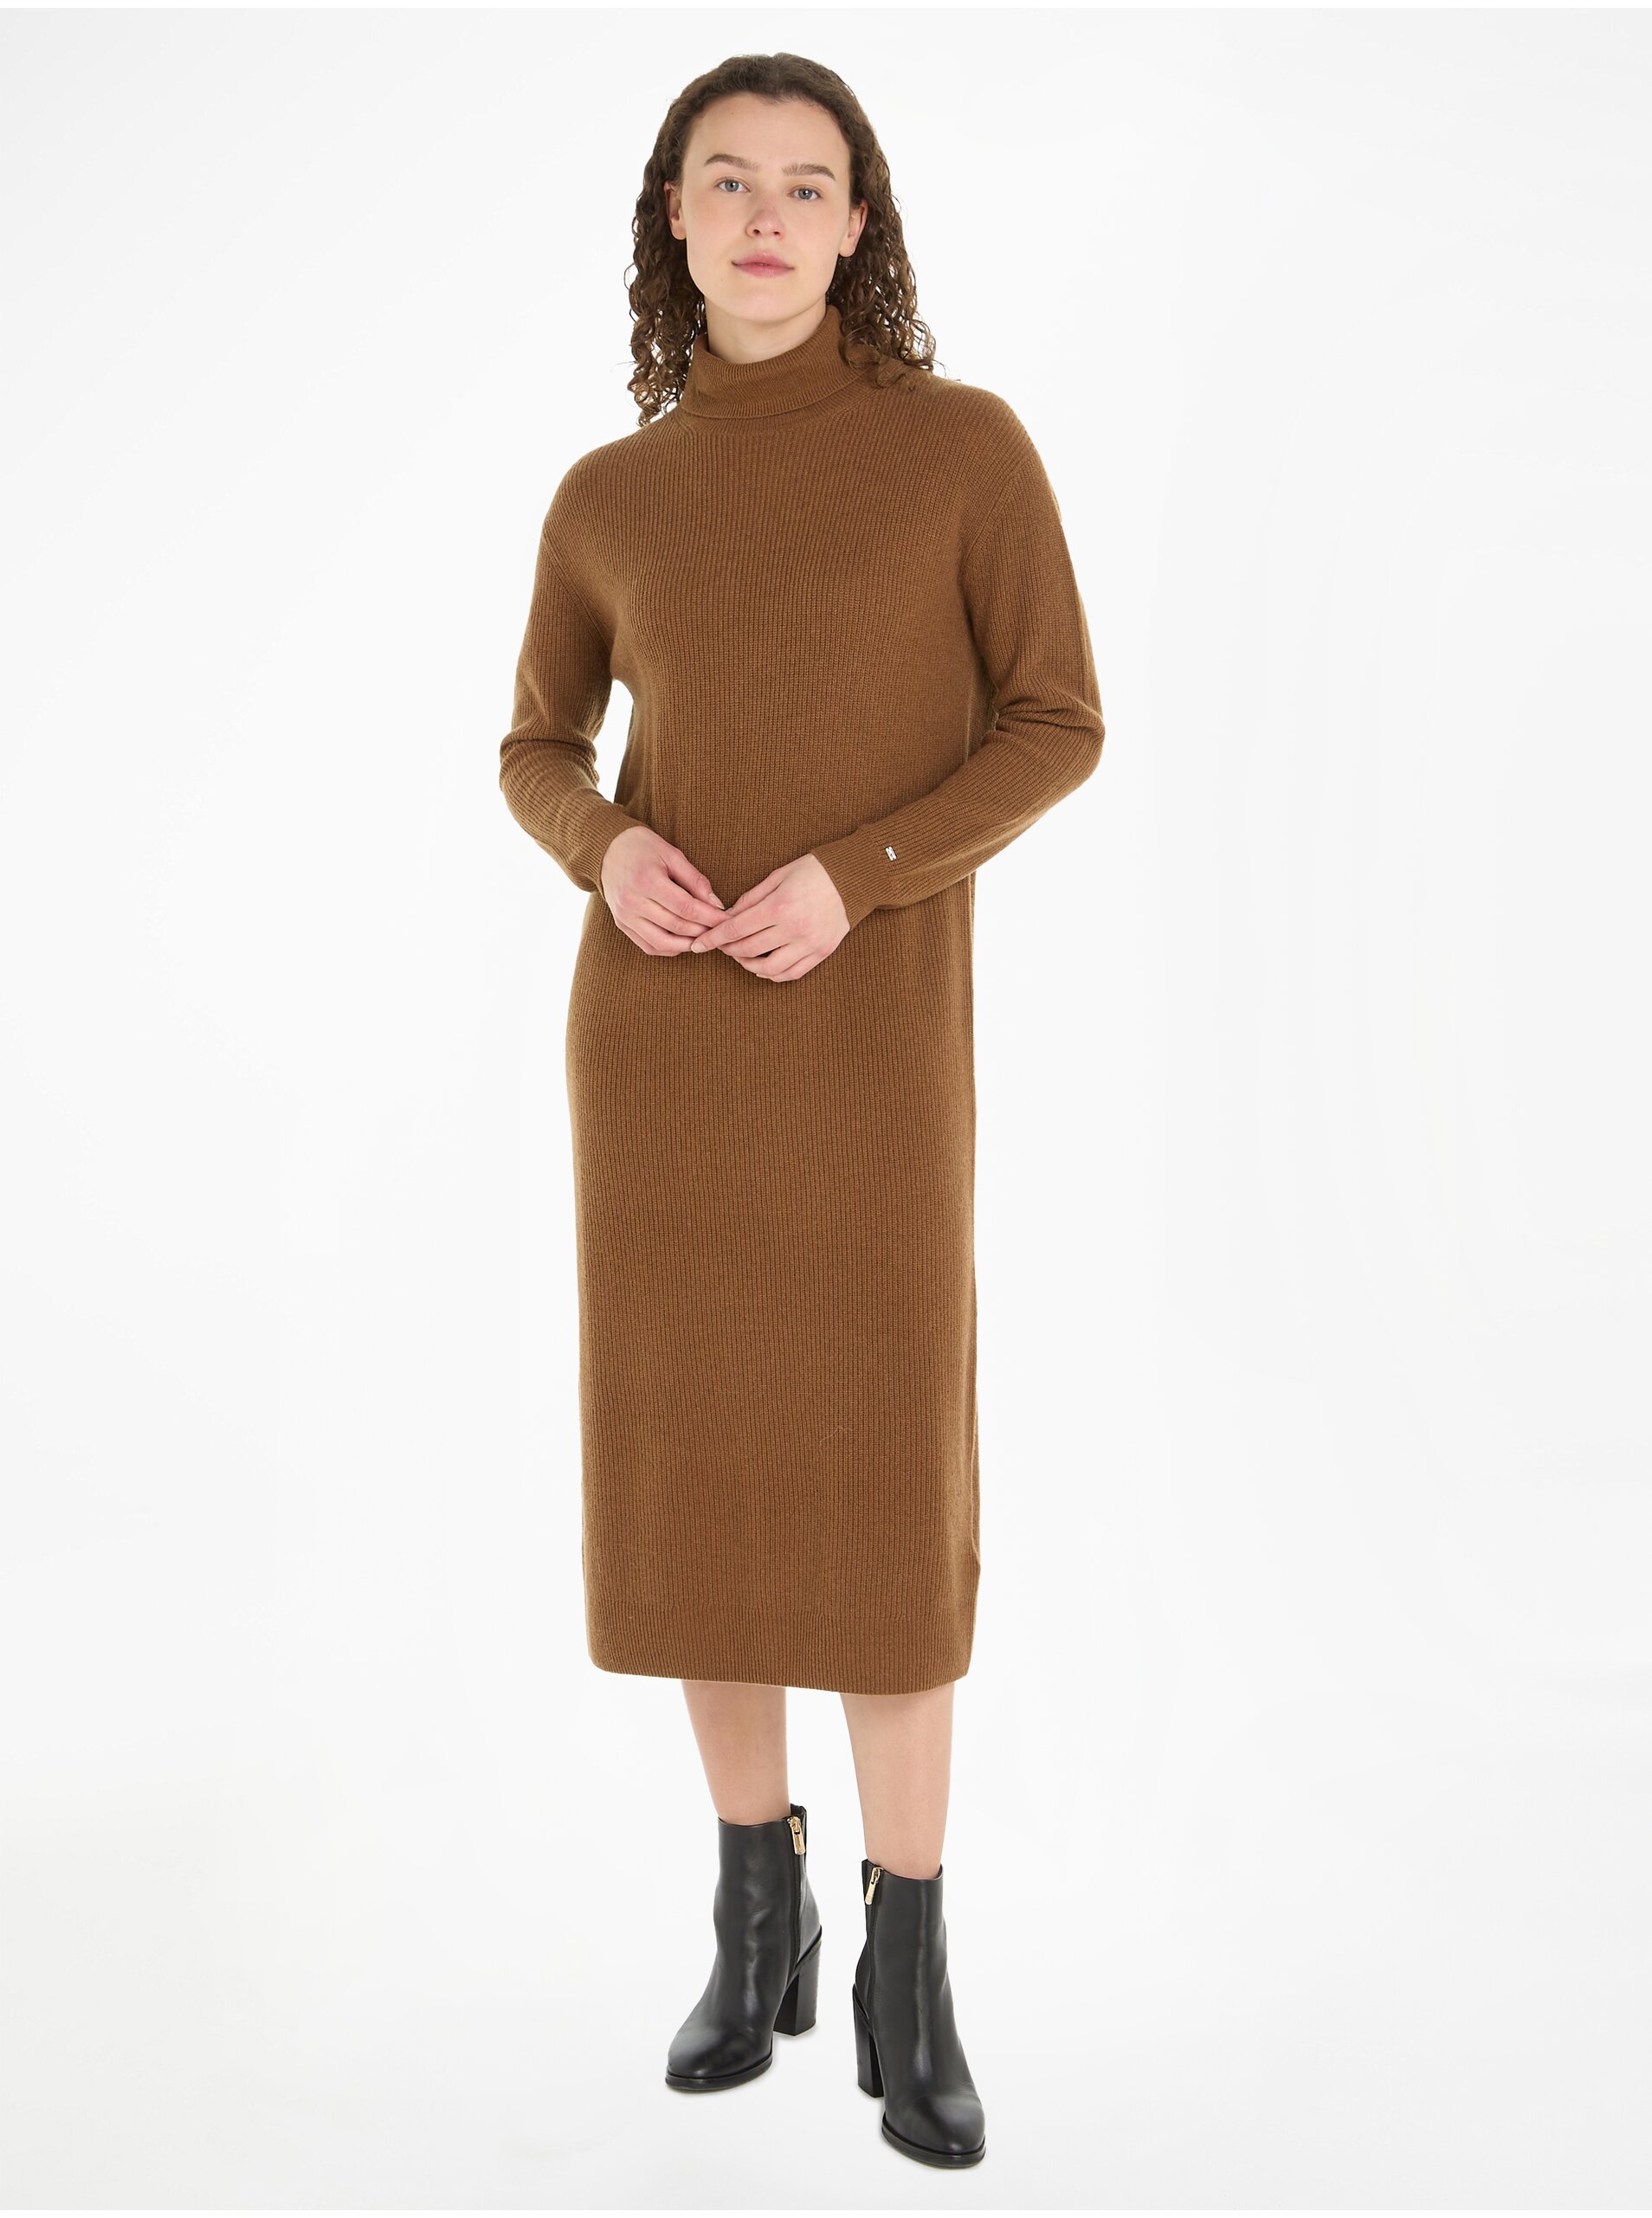 Women's brown wool midi dress with cashmere Tommy Hilfiger - Women